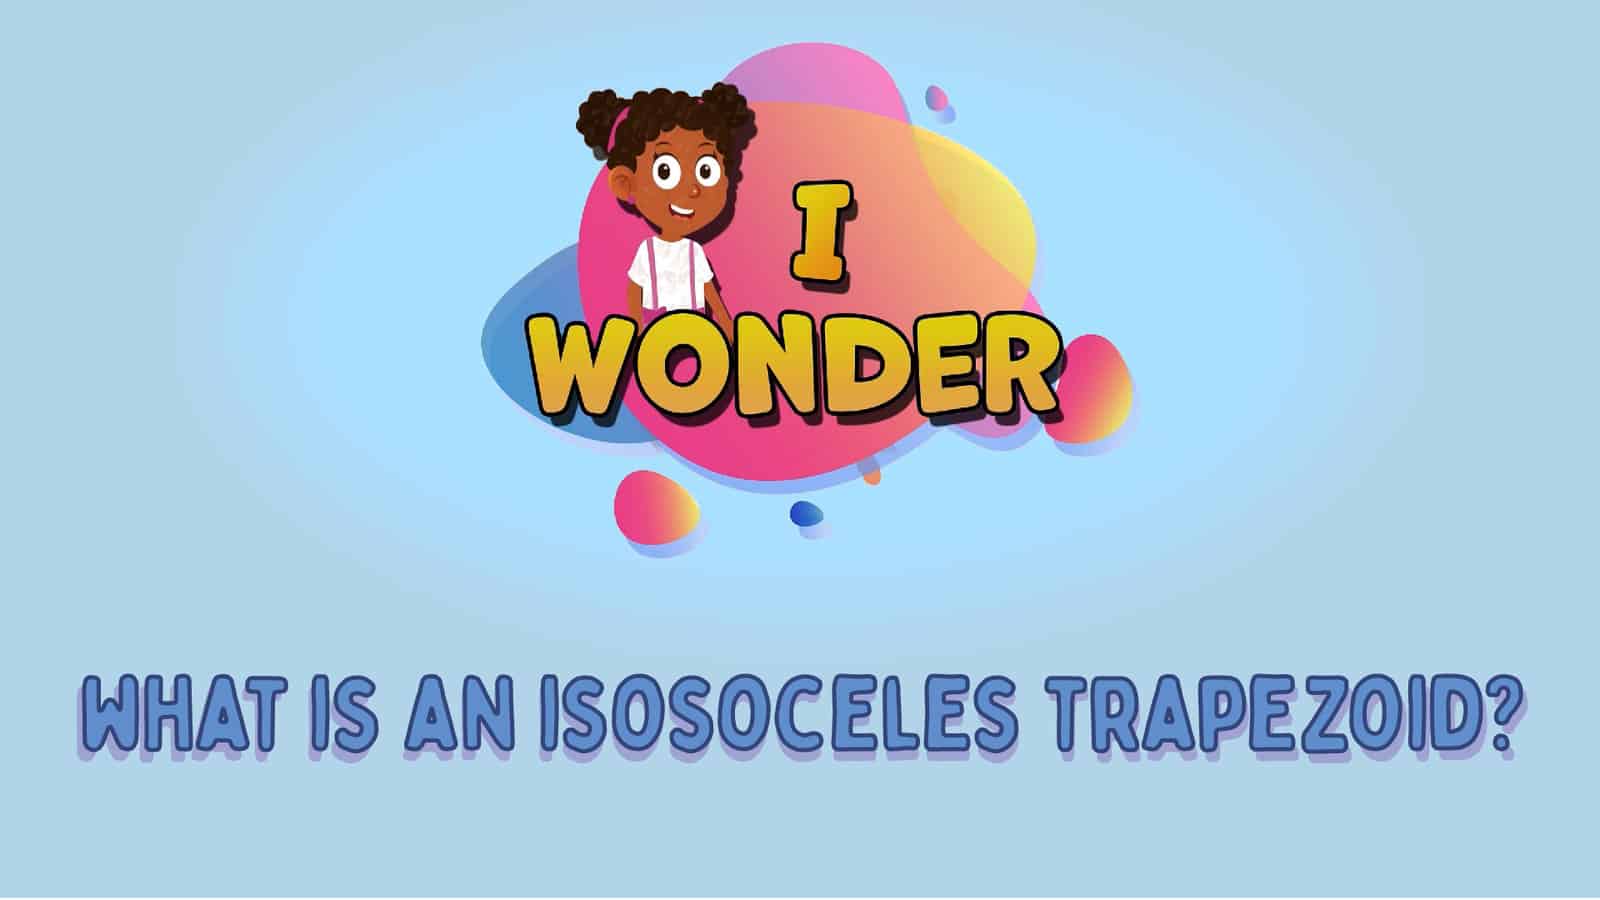 What Is An Isosceles Trapezoid?